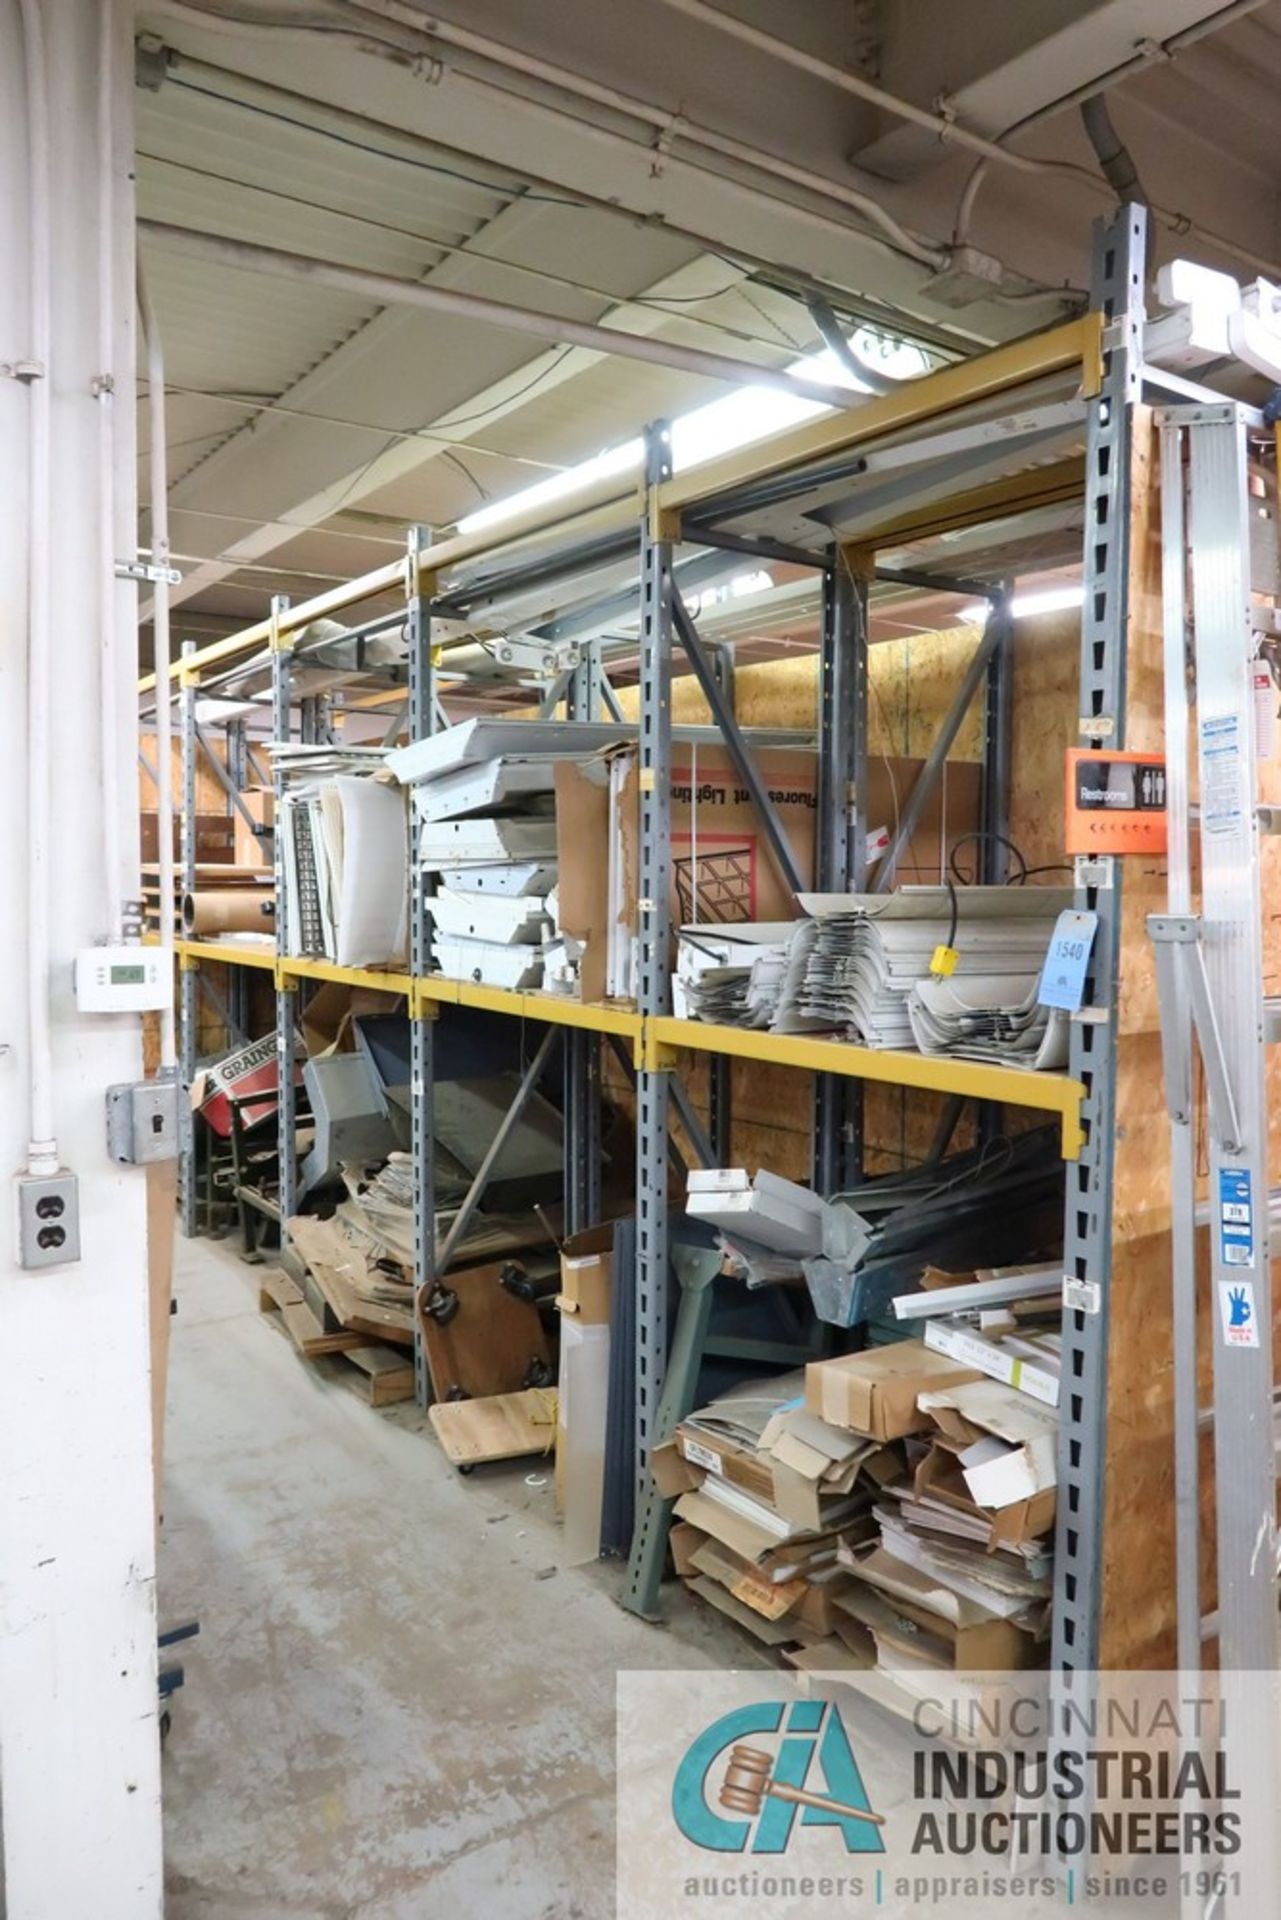 SECTIONS 45" X 24" X 108" ADJUSTABLE PALLET RACKS WITH CONTENTS INCLUDING CONDUIT, LIGHTING,